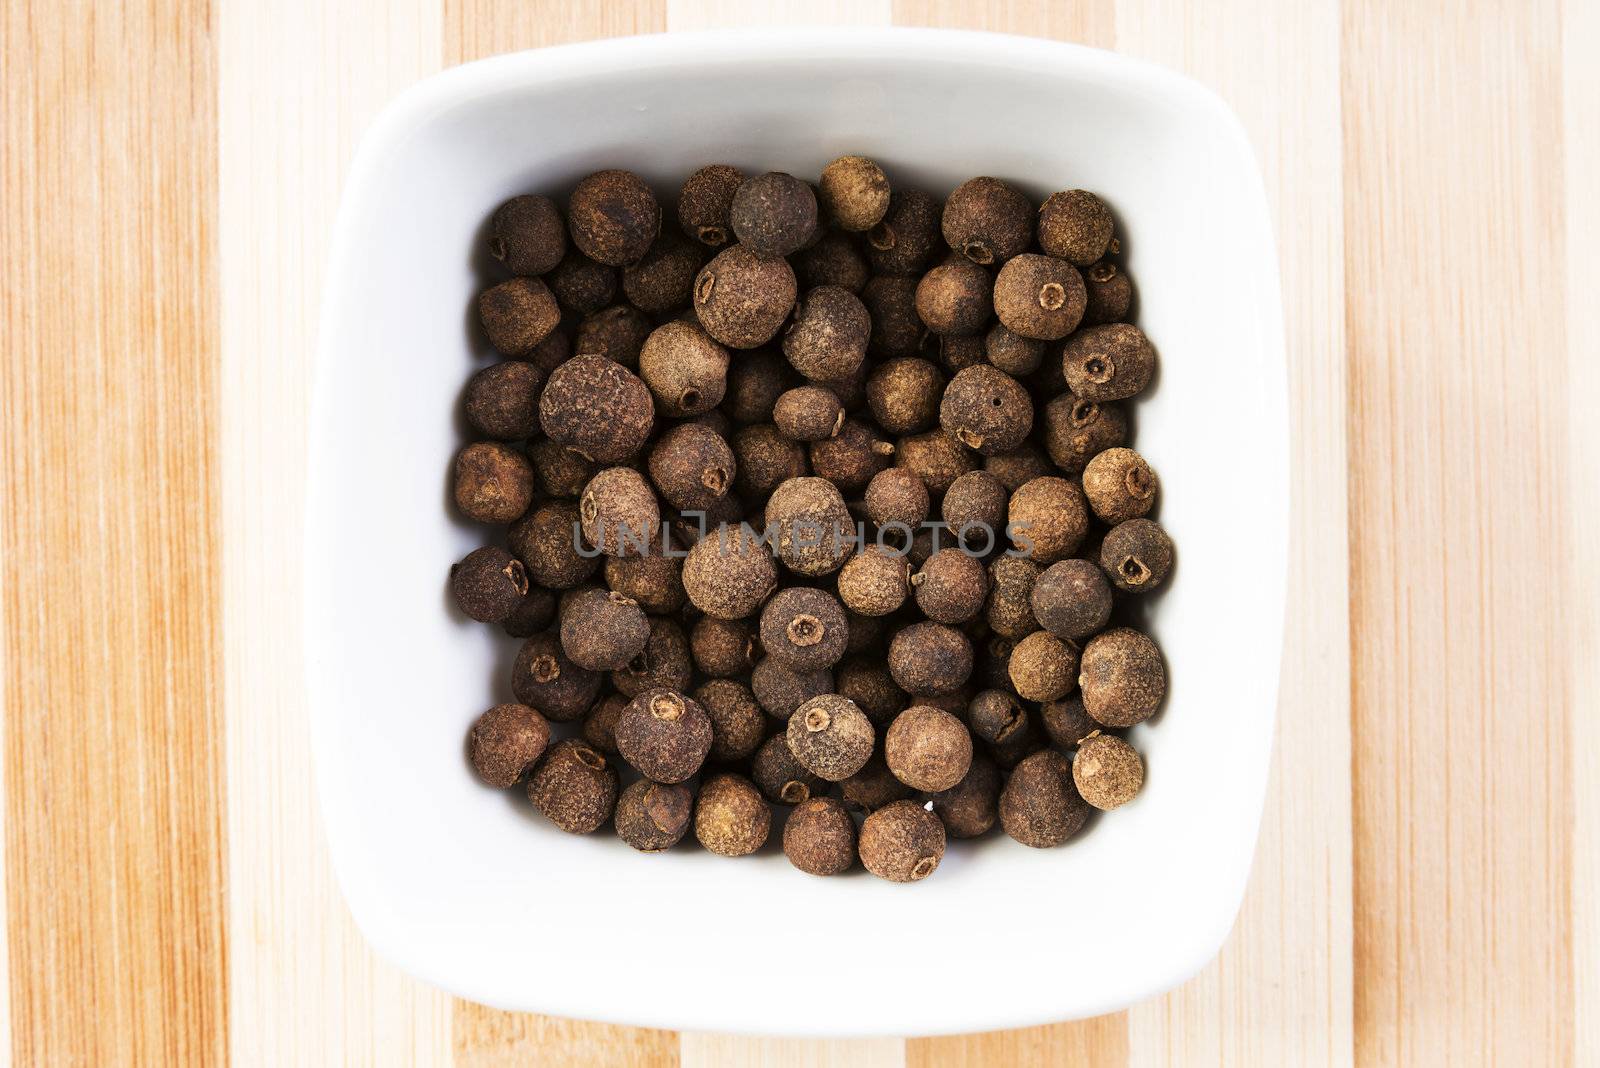 Allspice in bowl on table